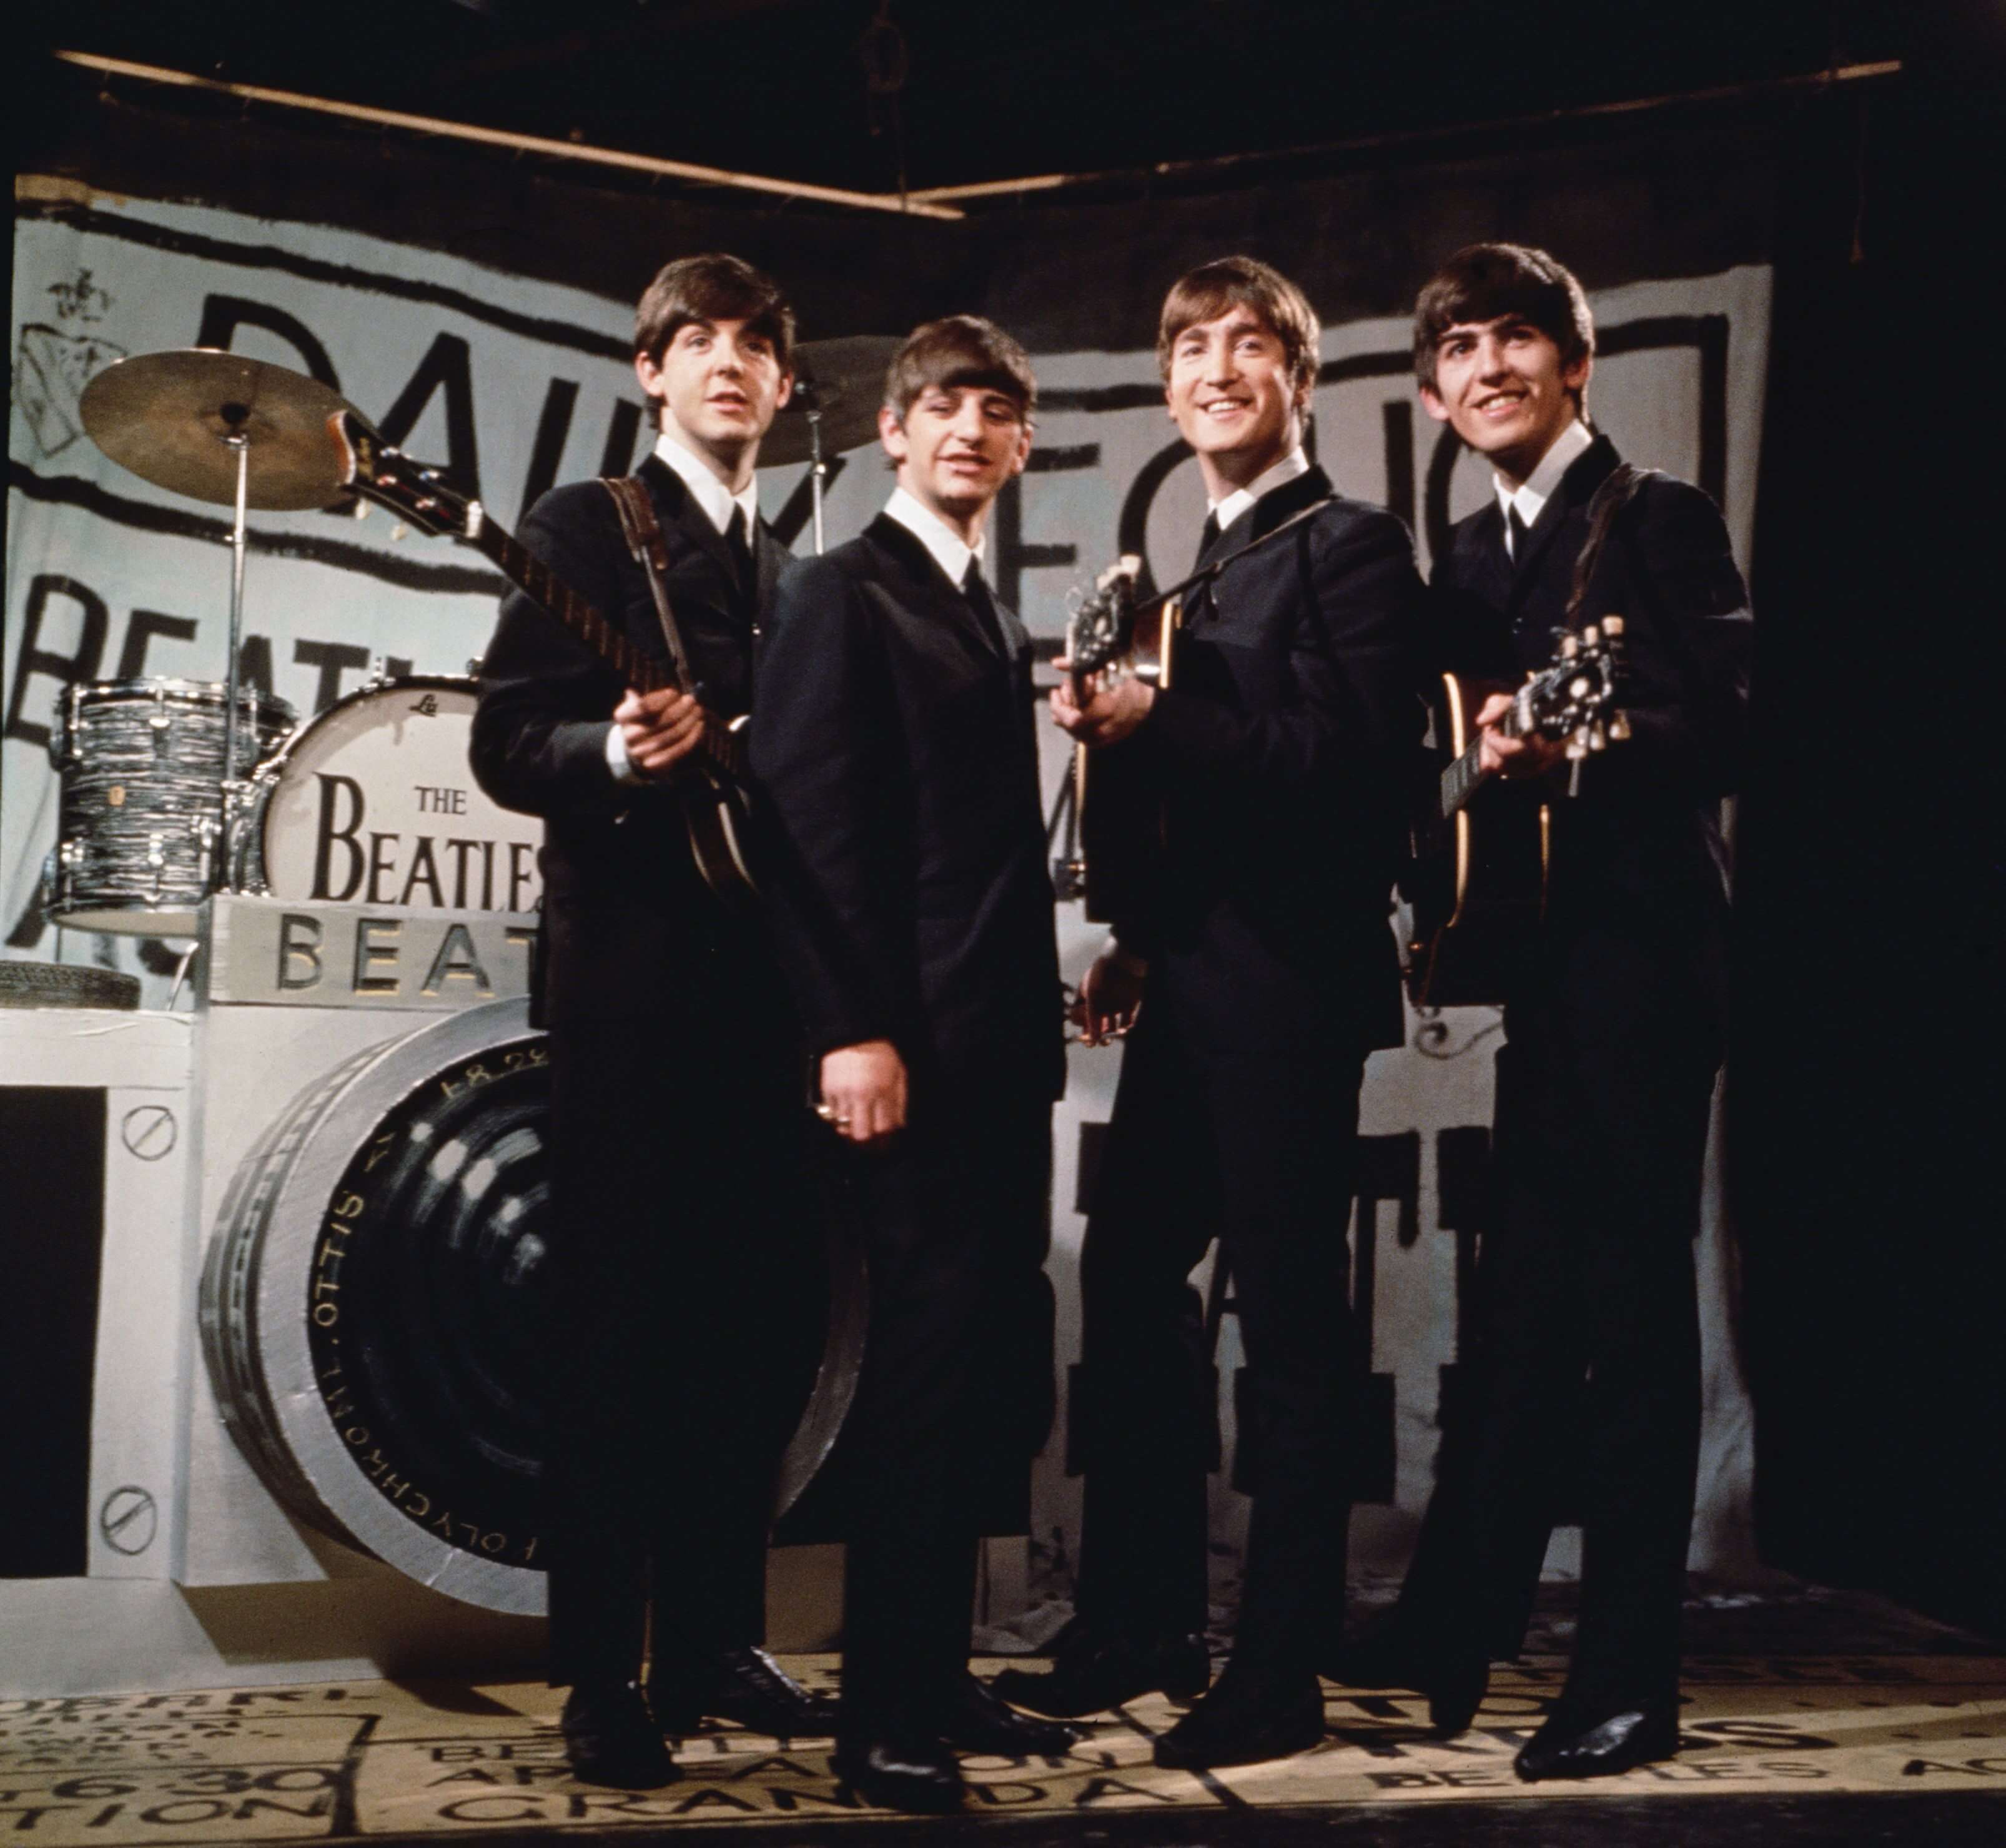 The Beatles with instruments